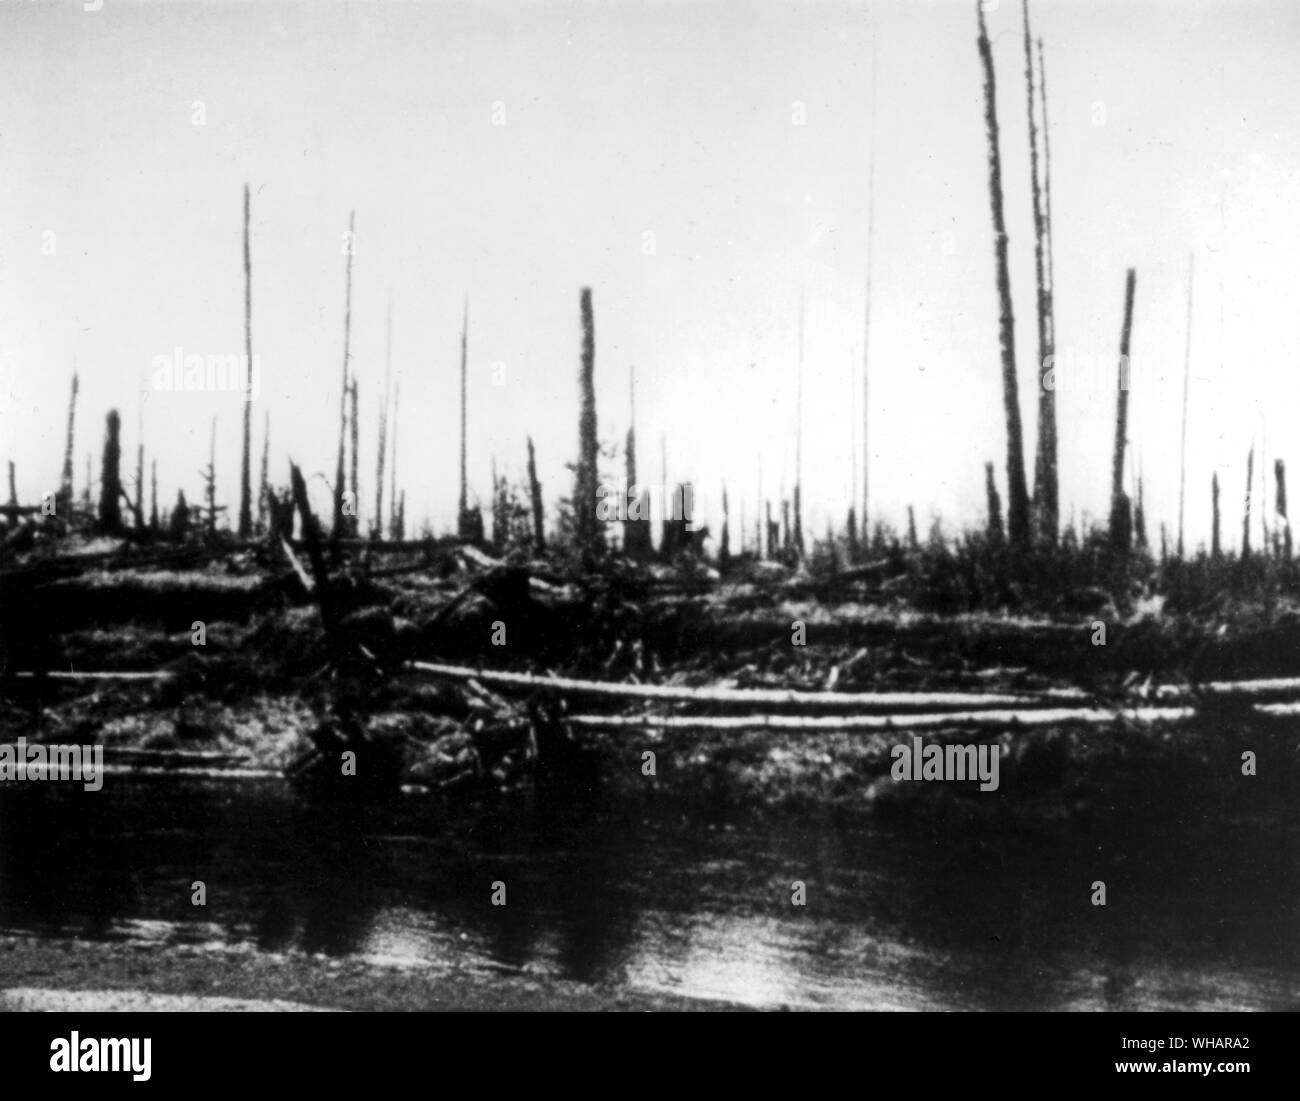 Tunguska after the 1908 explosion. On June 30, 1908, something exploded 8 km above the Stony Tunguska river. About 2150 square kilometres of Siberian taiga were devastated and 80 millions trees were overthrown. Up to now, it is not clear whether the great explosion was due to a comet or an asteroid or something else. Stock Photo